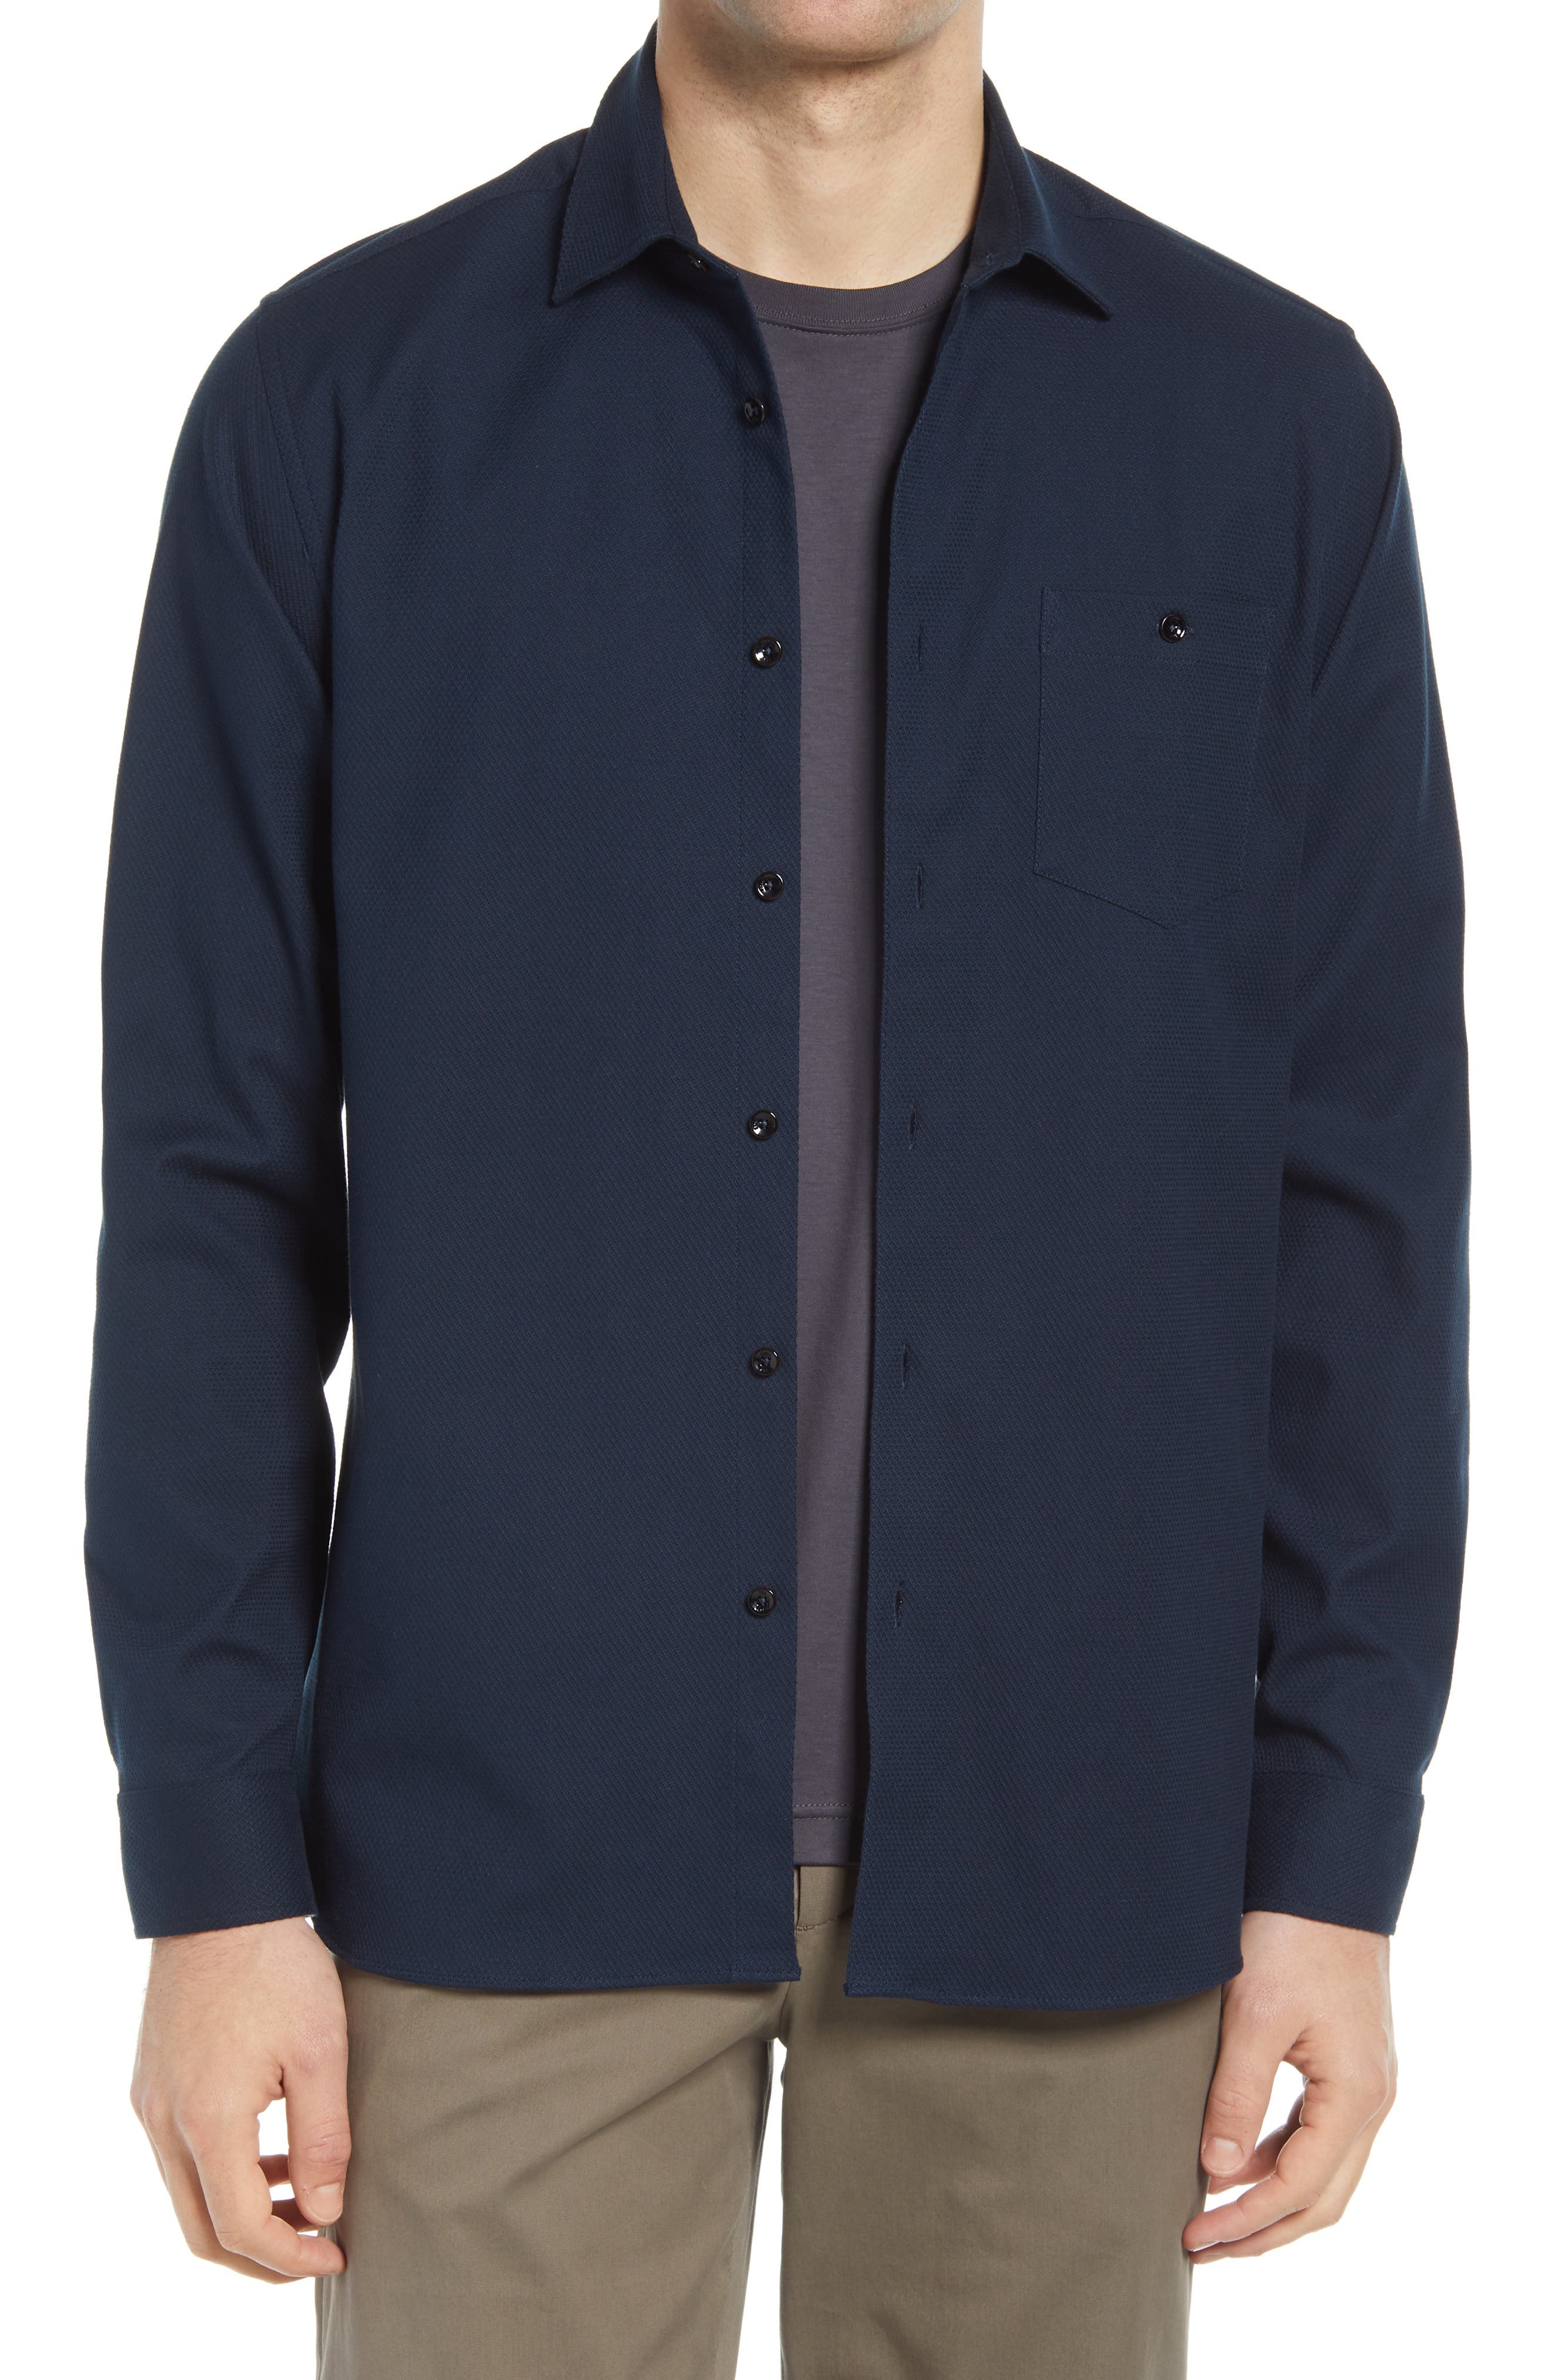 TED BAKER FOOTAG BUTTON-UP SHIRT,5059489166115